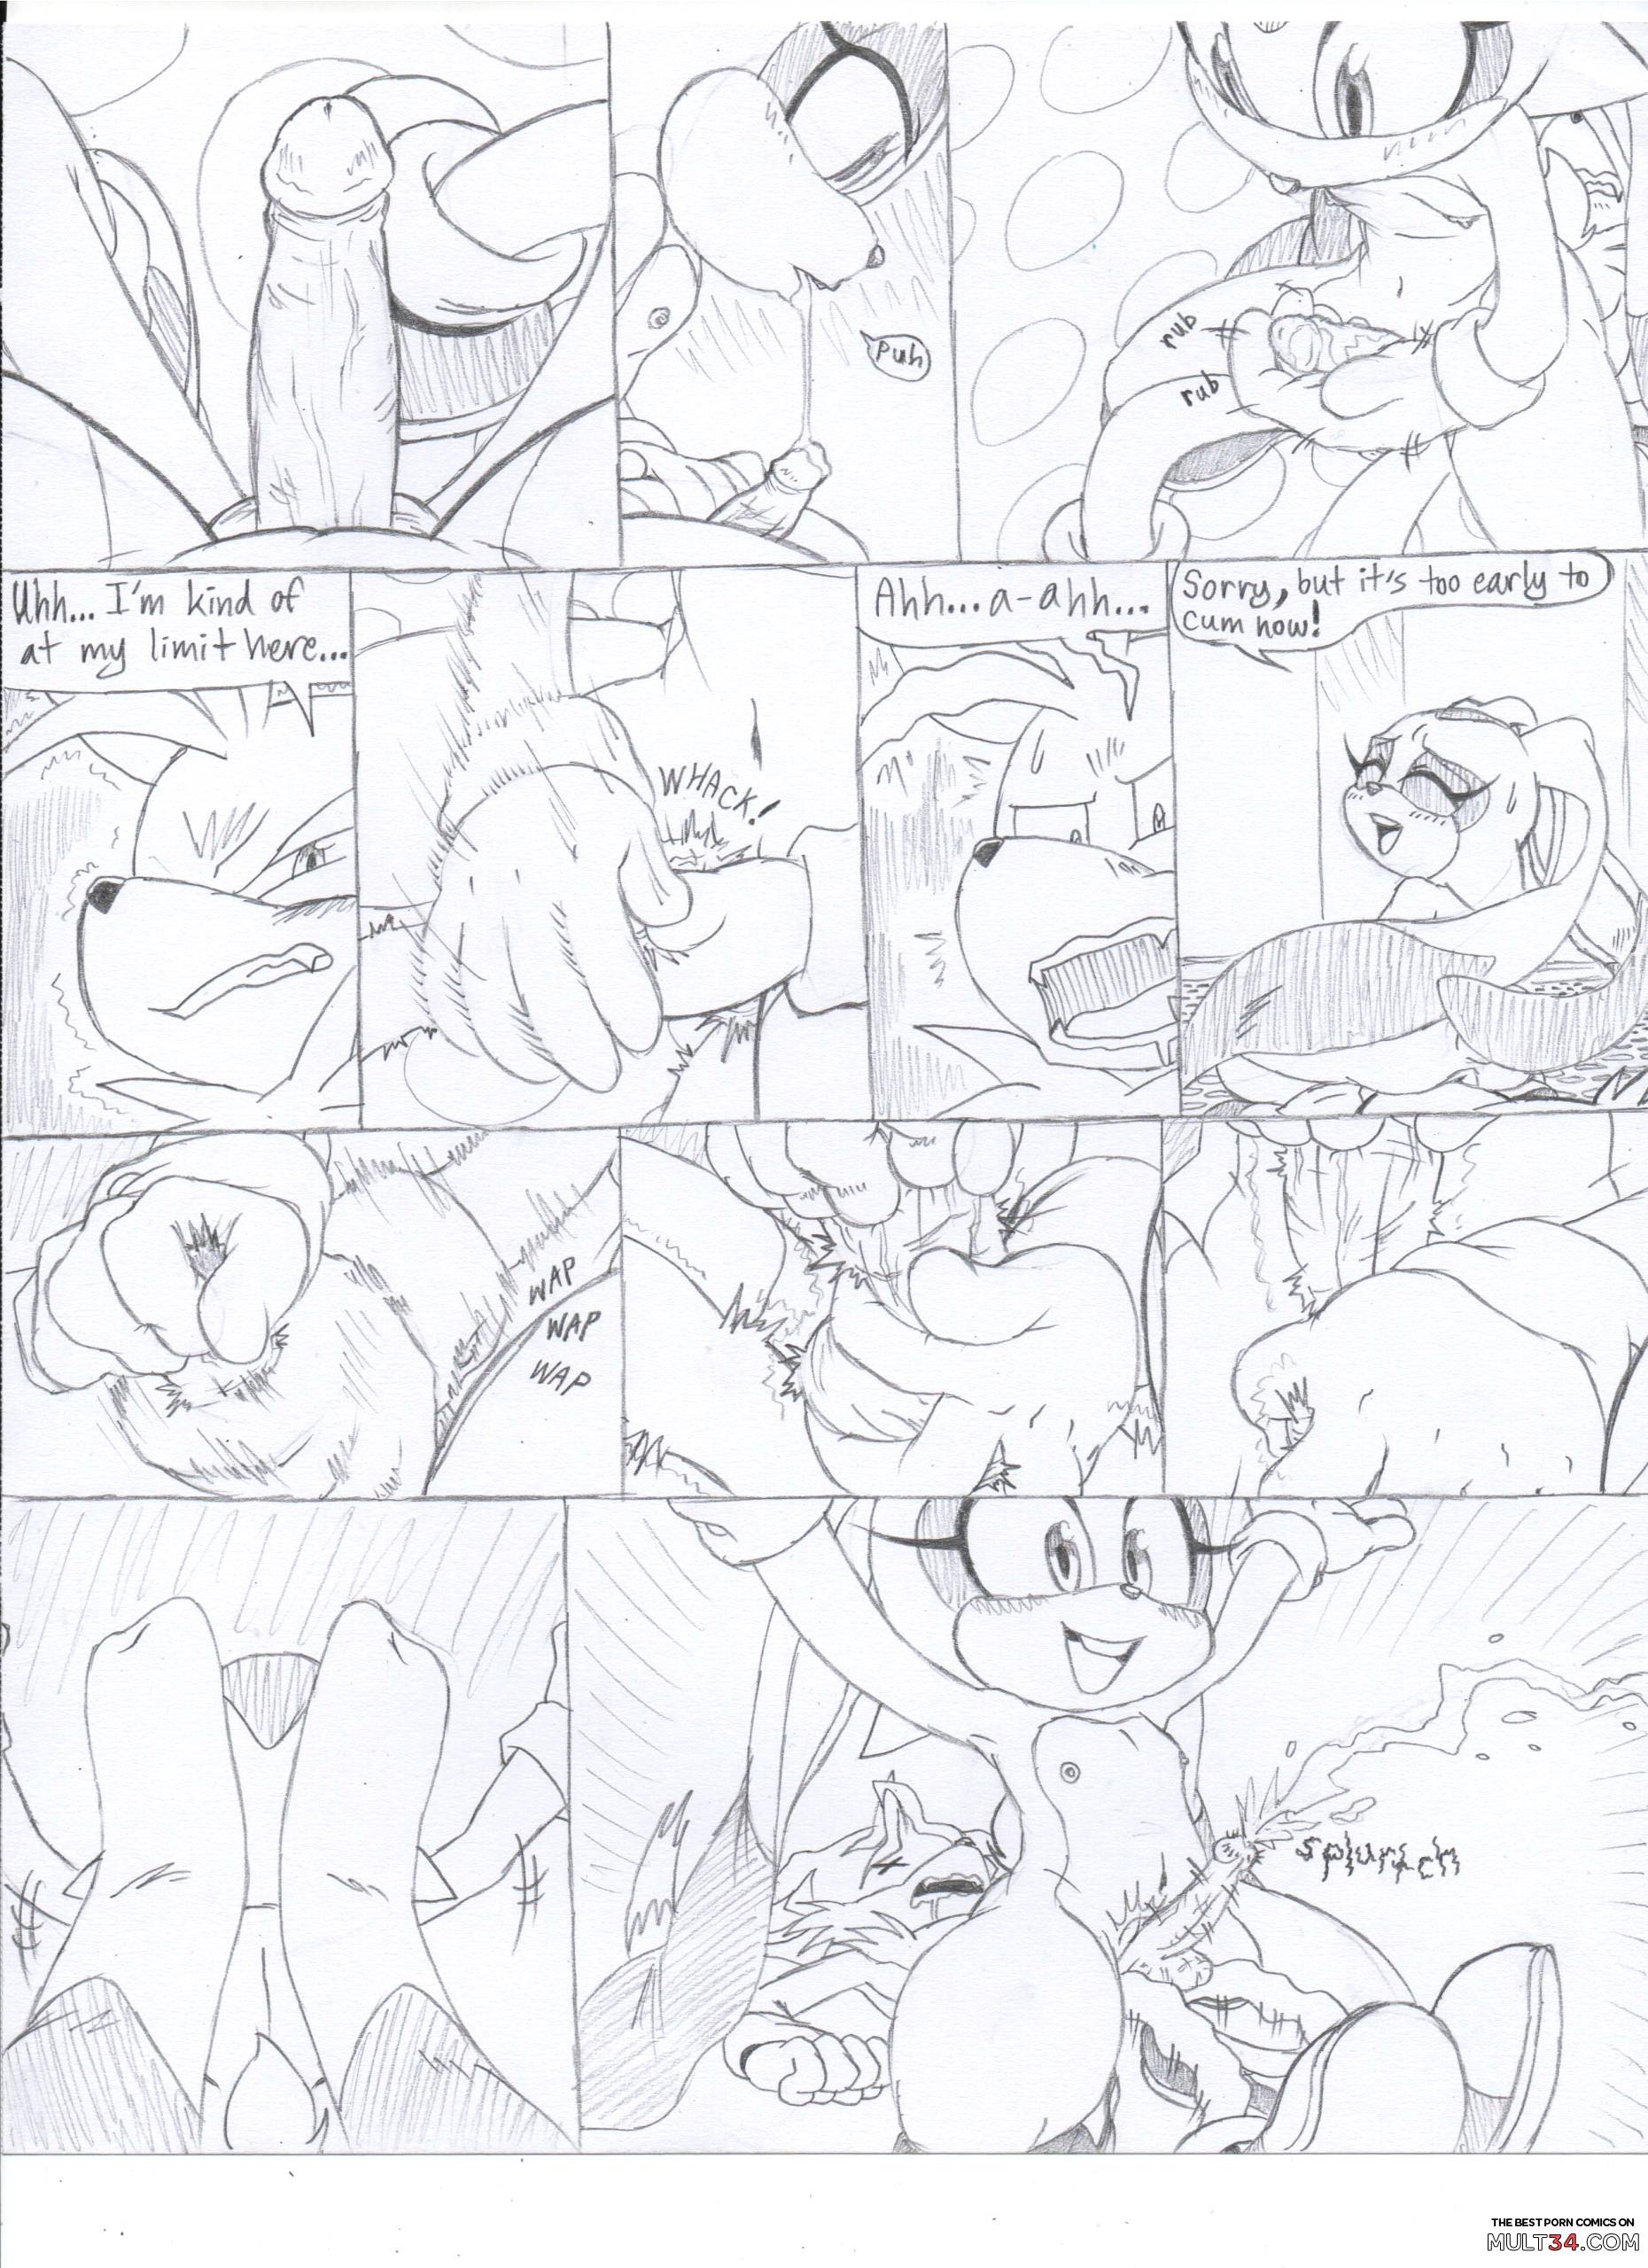 Cream x Tails page 3